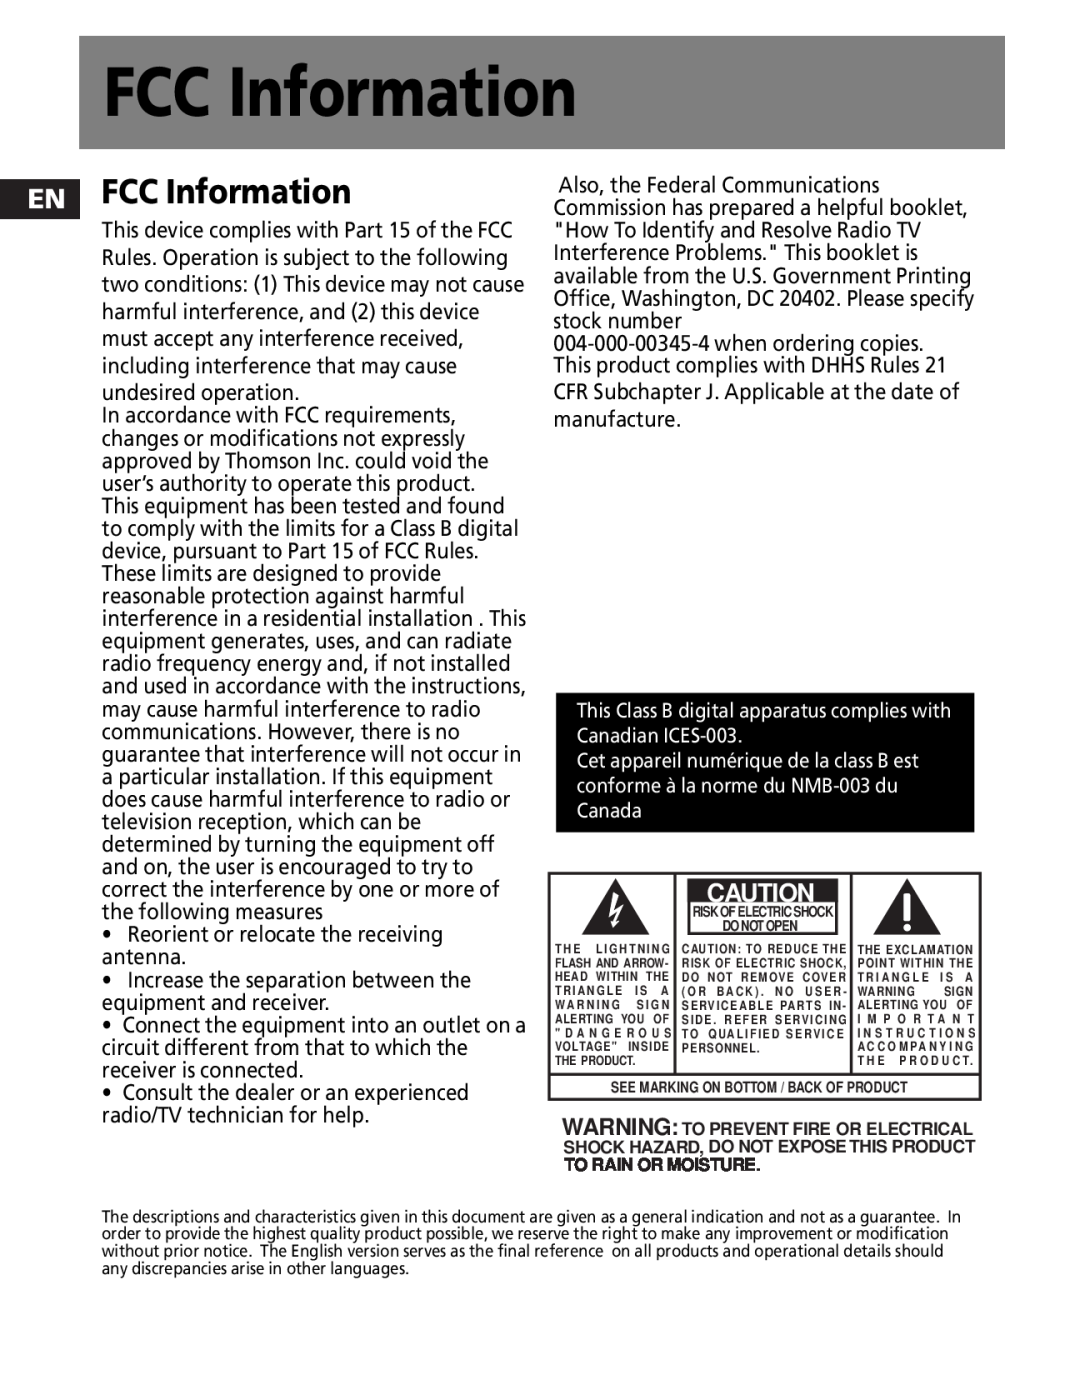 RCA M100256 user manual EN FCC Information, This Class B digital apparatus complies with Canadian ICES-003 